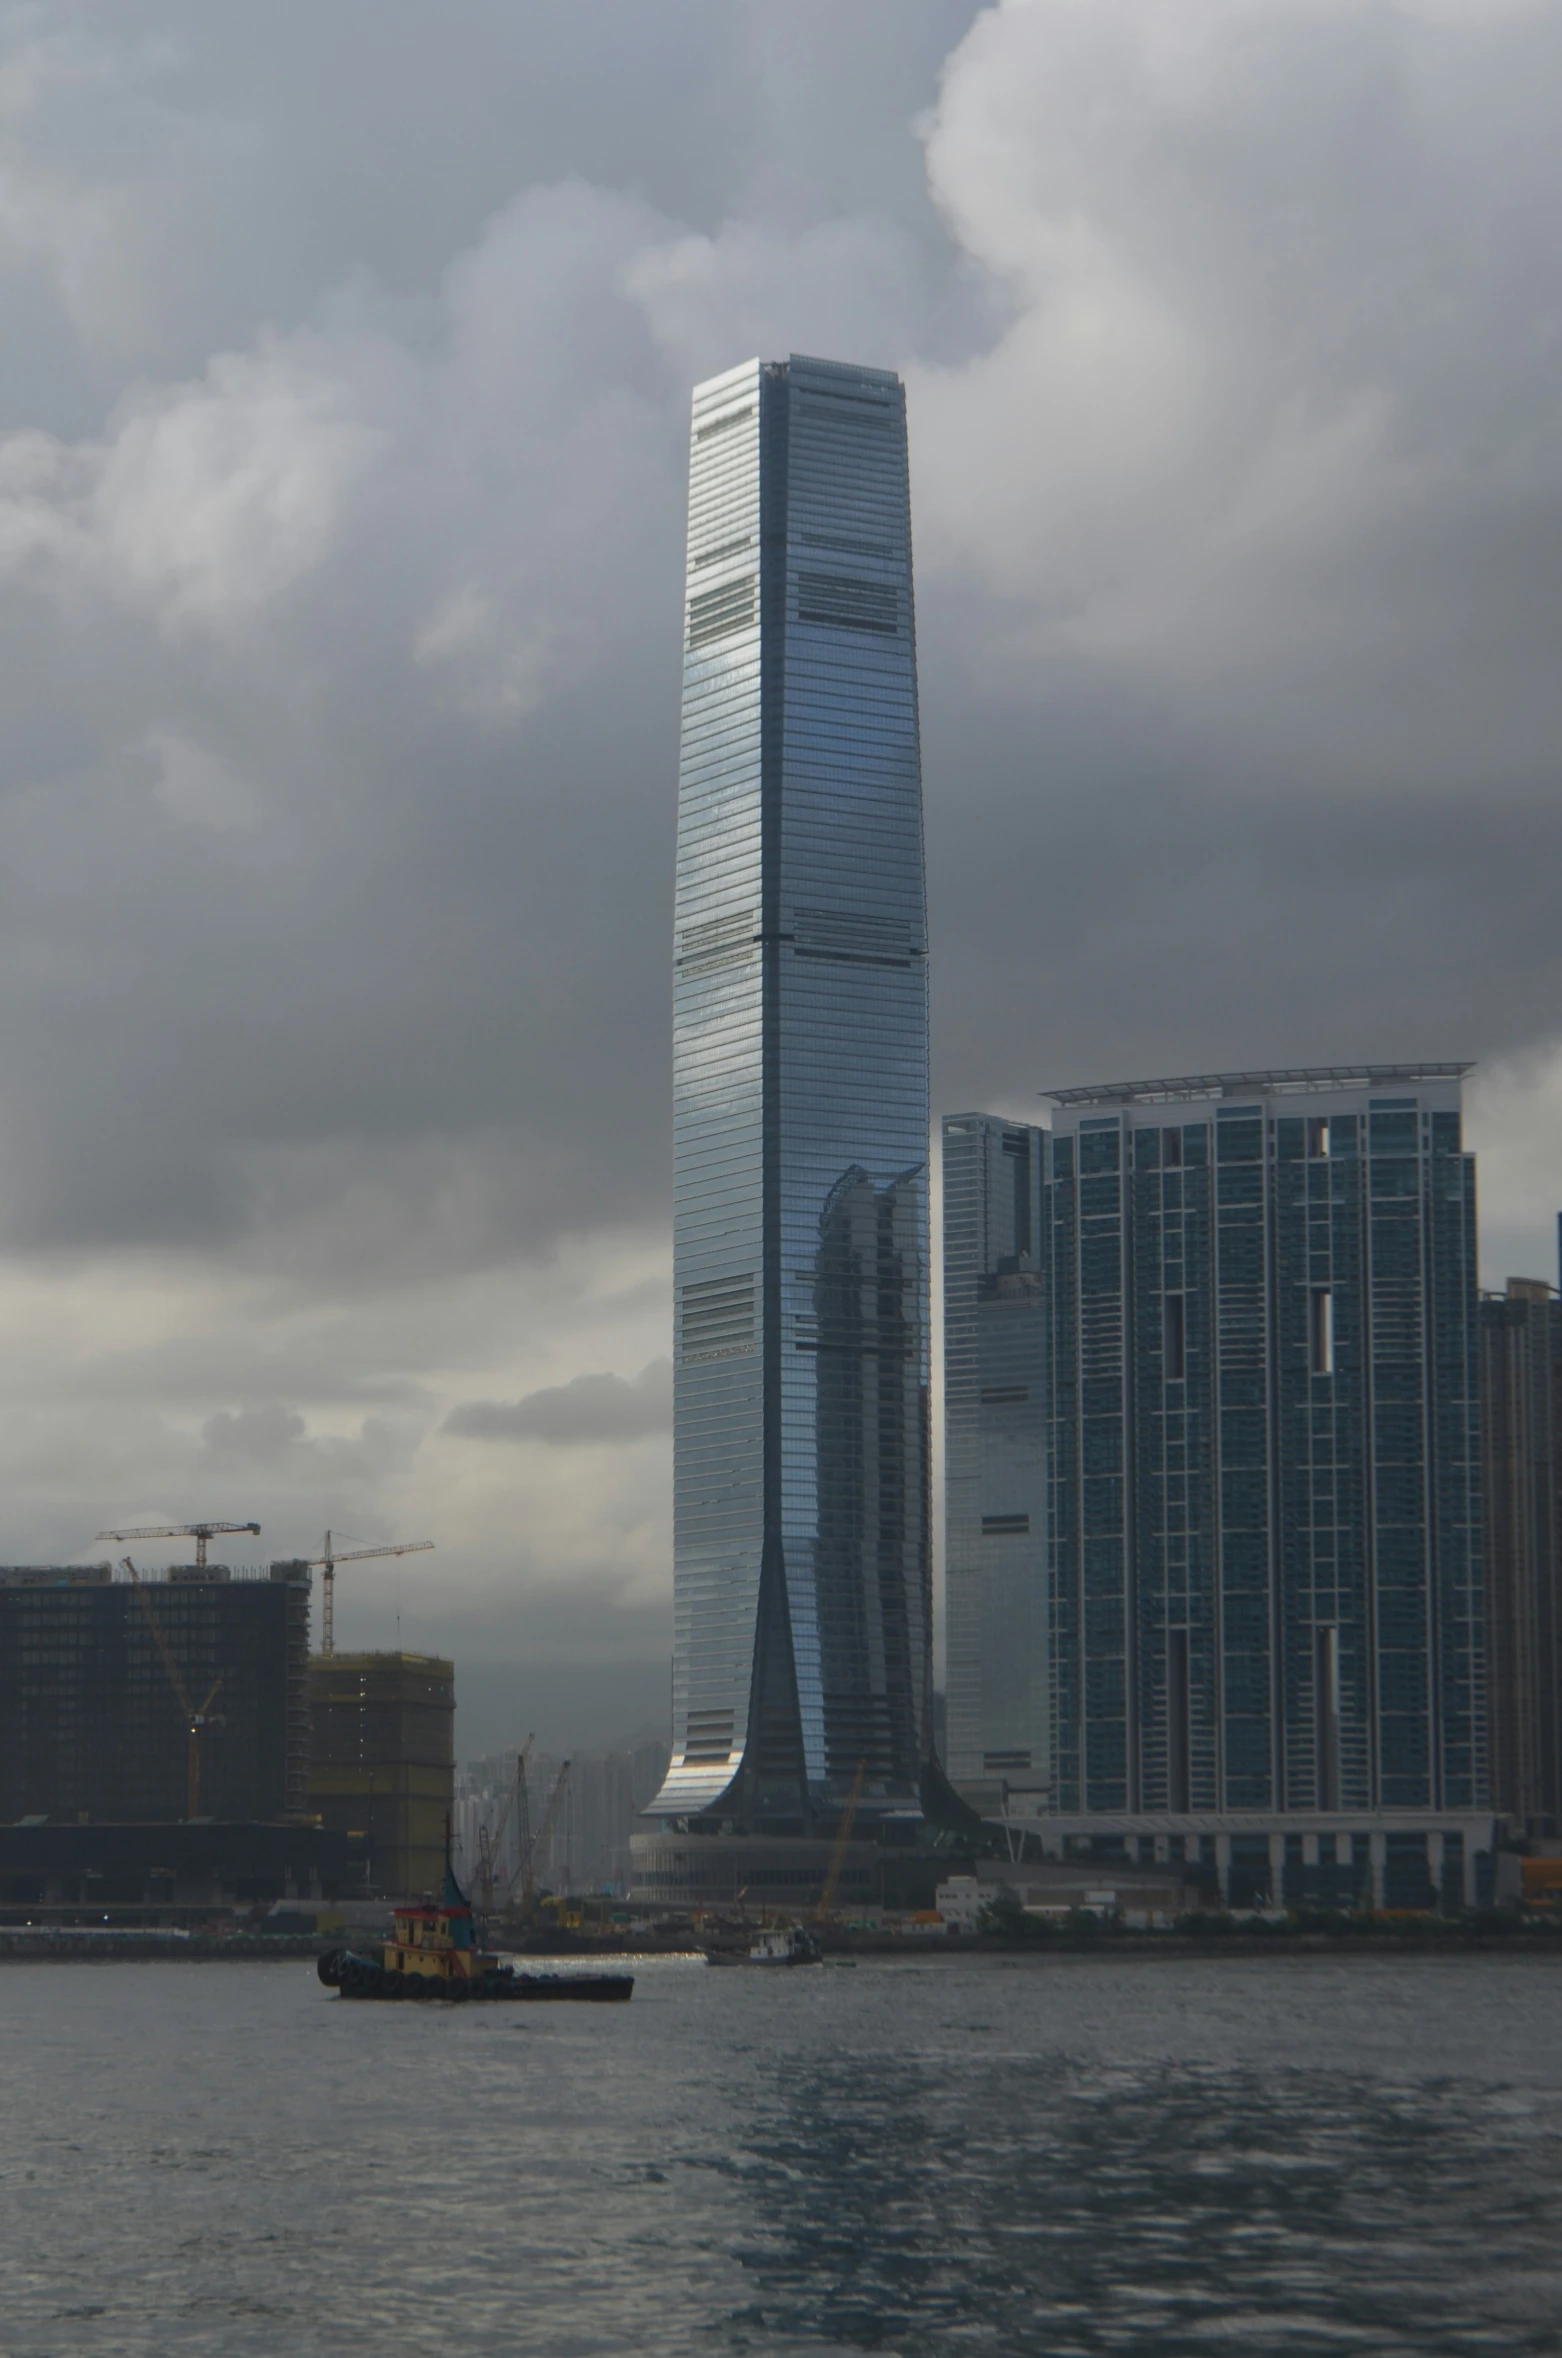 boat sailing past large high - rise buildings on a cloudy day